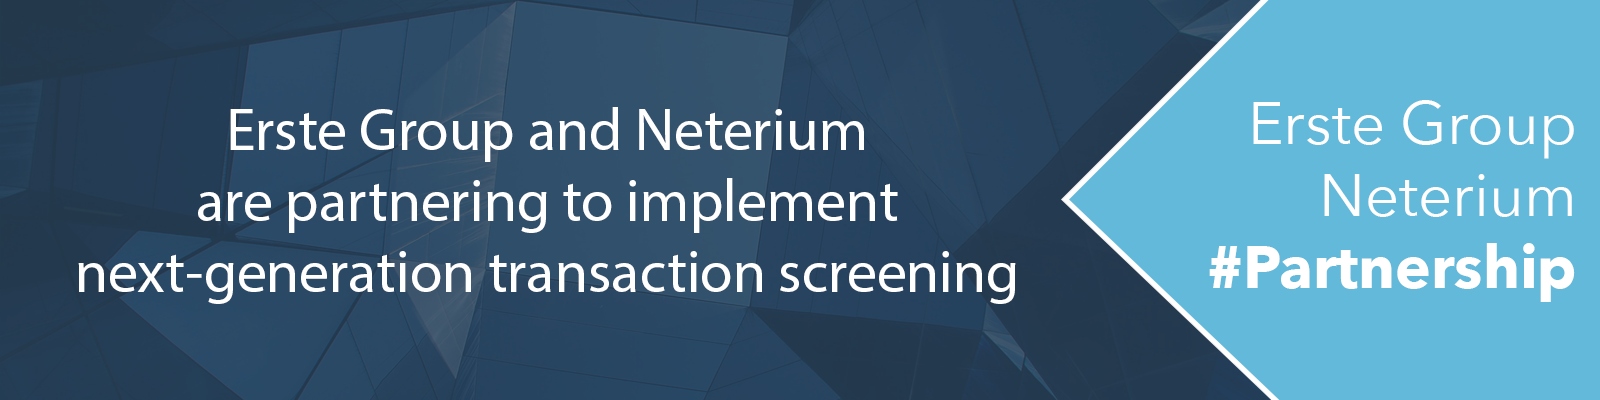 Erste Group and Neterium are partnering to implement next-generation transaction screening